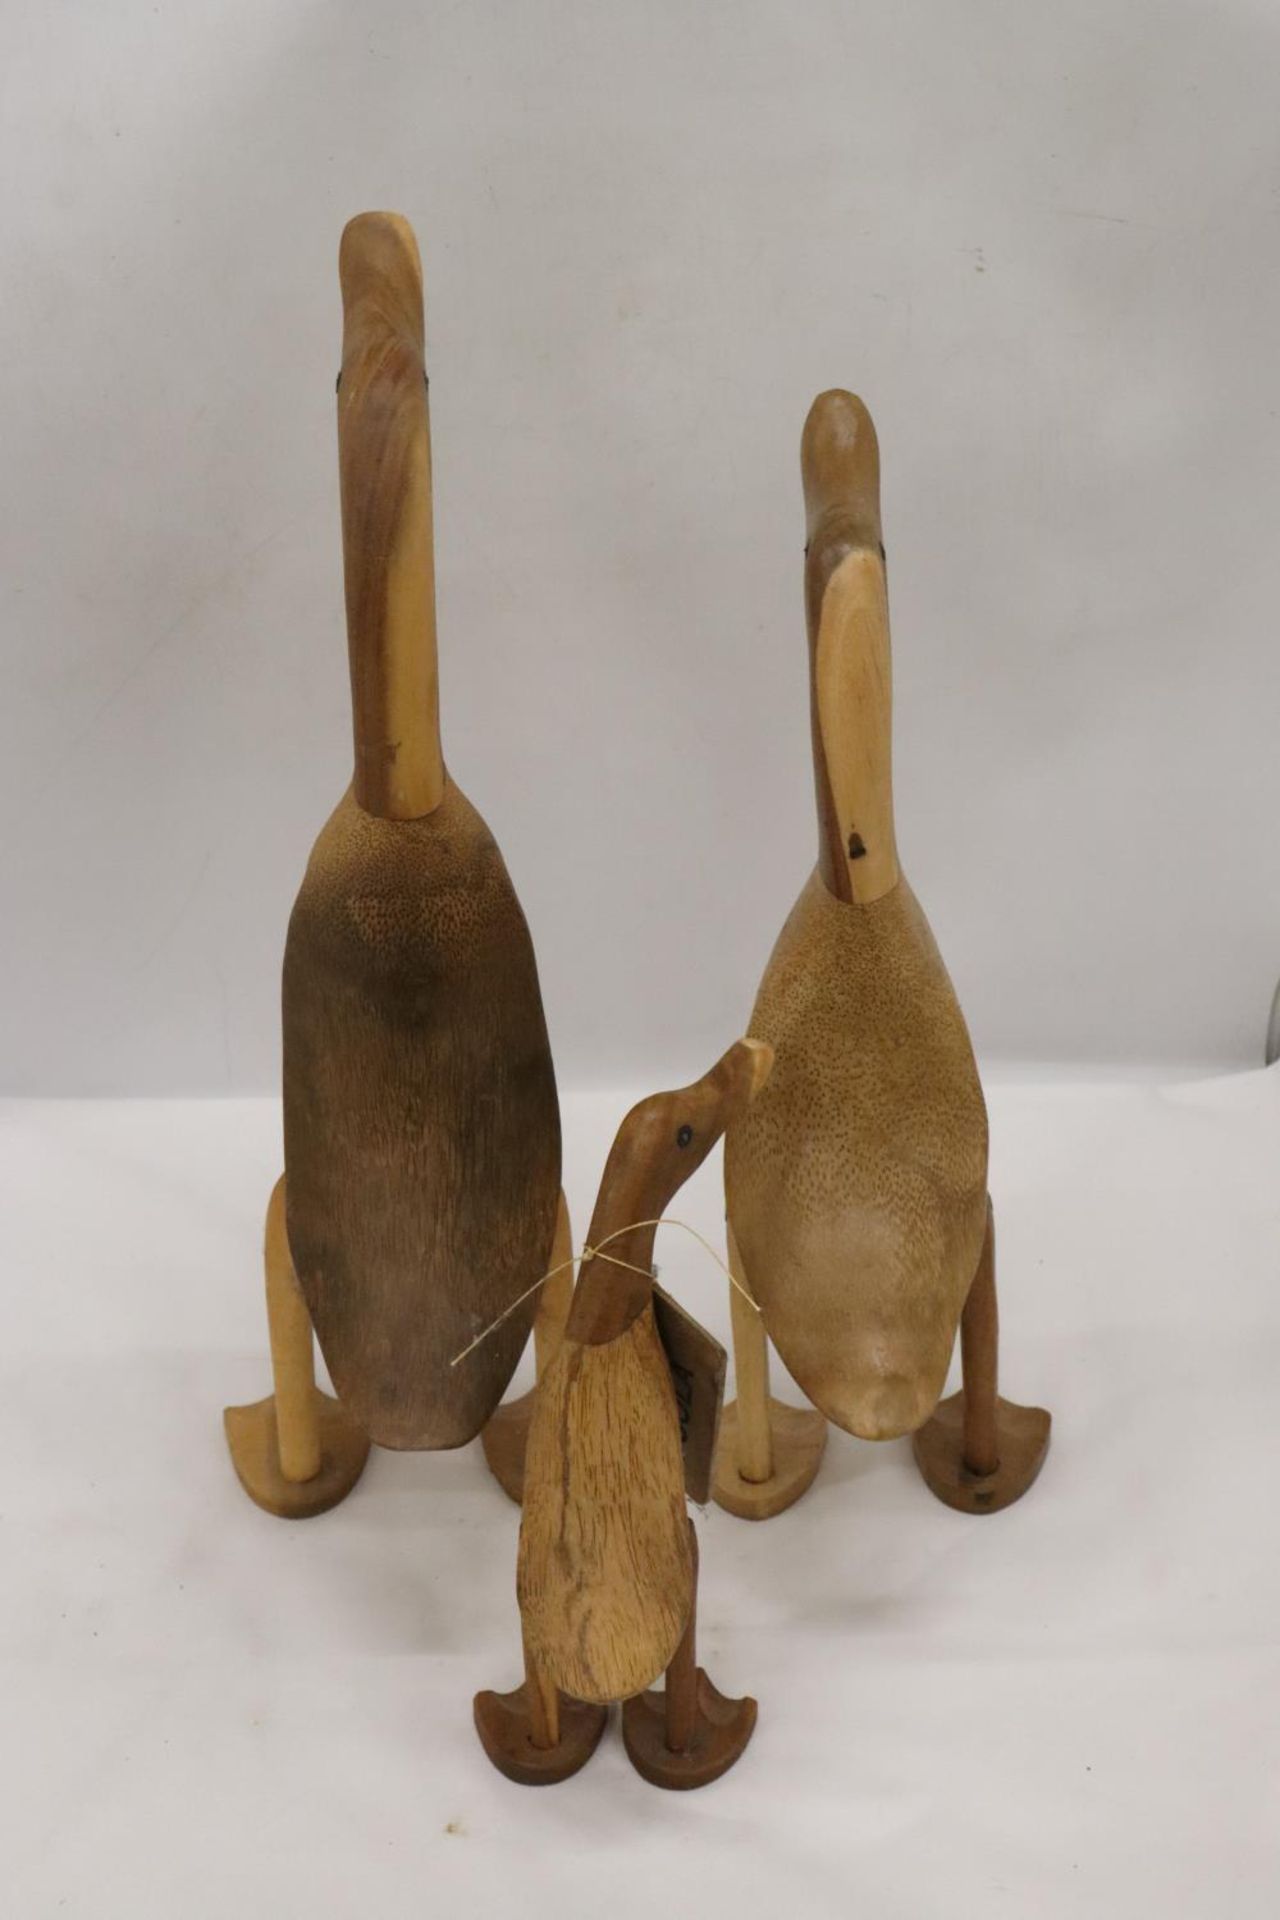 A WOODEN DUCK FAMILY TO INCLUDE DADDY DUCK, MUMMY DUCK AND BABY DUCK - Image 3 of 5